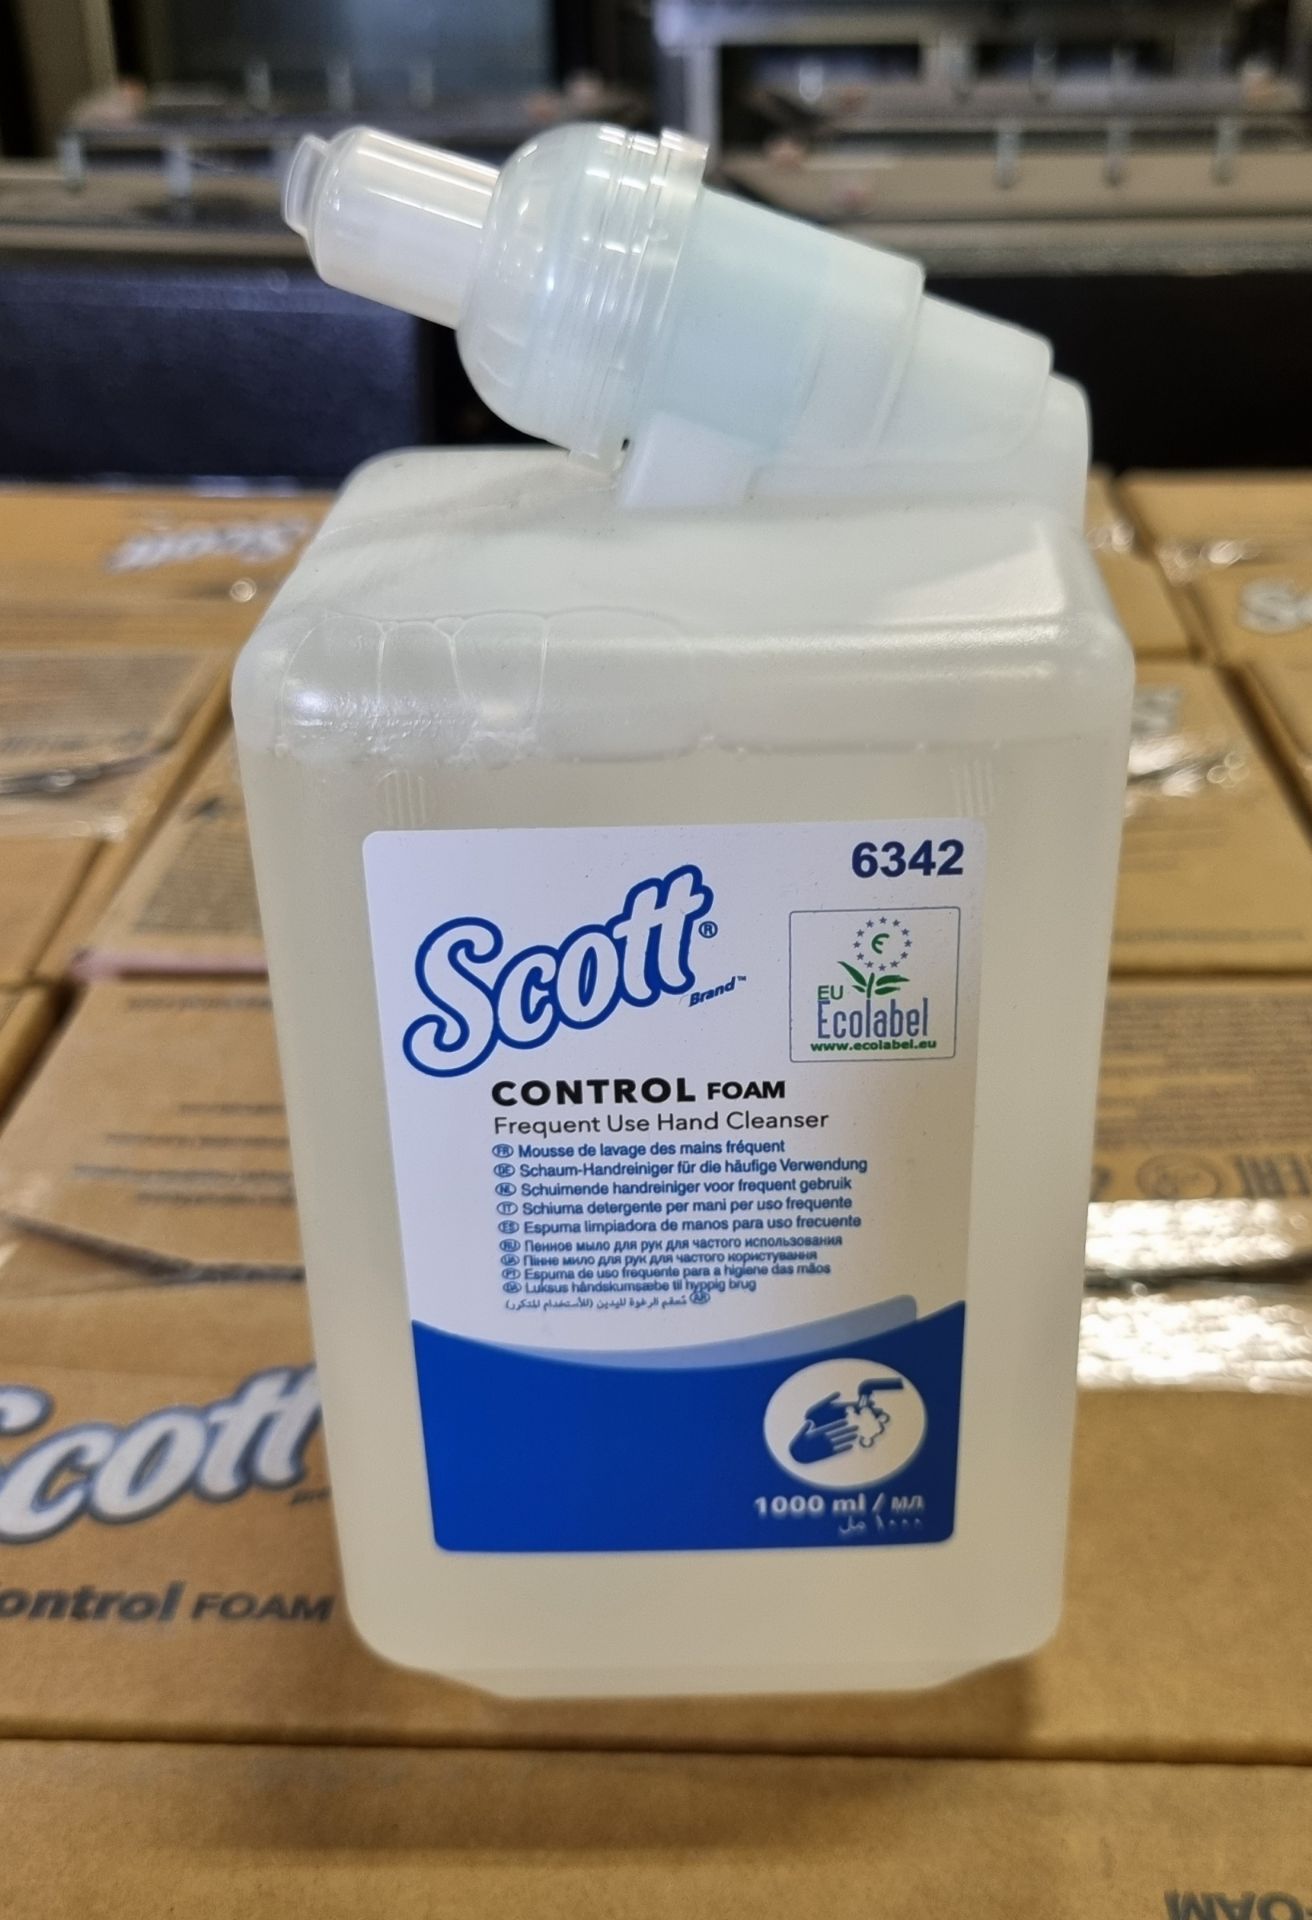 60x boxes of Scott Control Foam 6342 frequent used hand cleanser - 1L bottles - 6 per box - Image 3 of 4